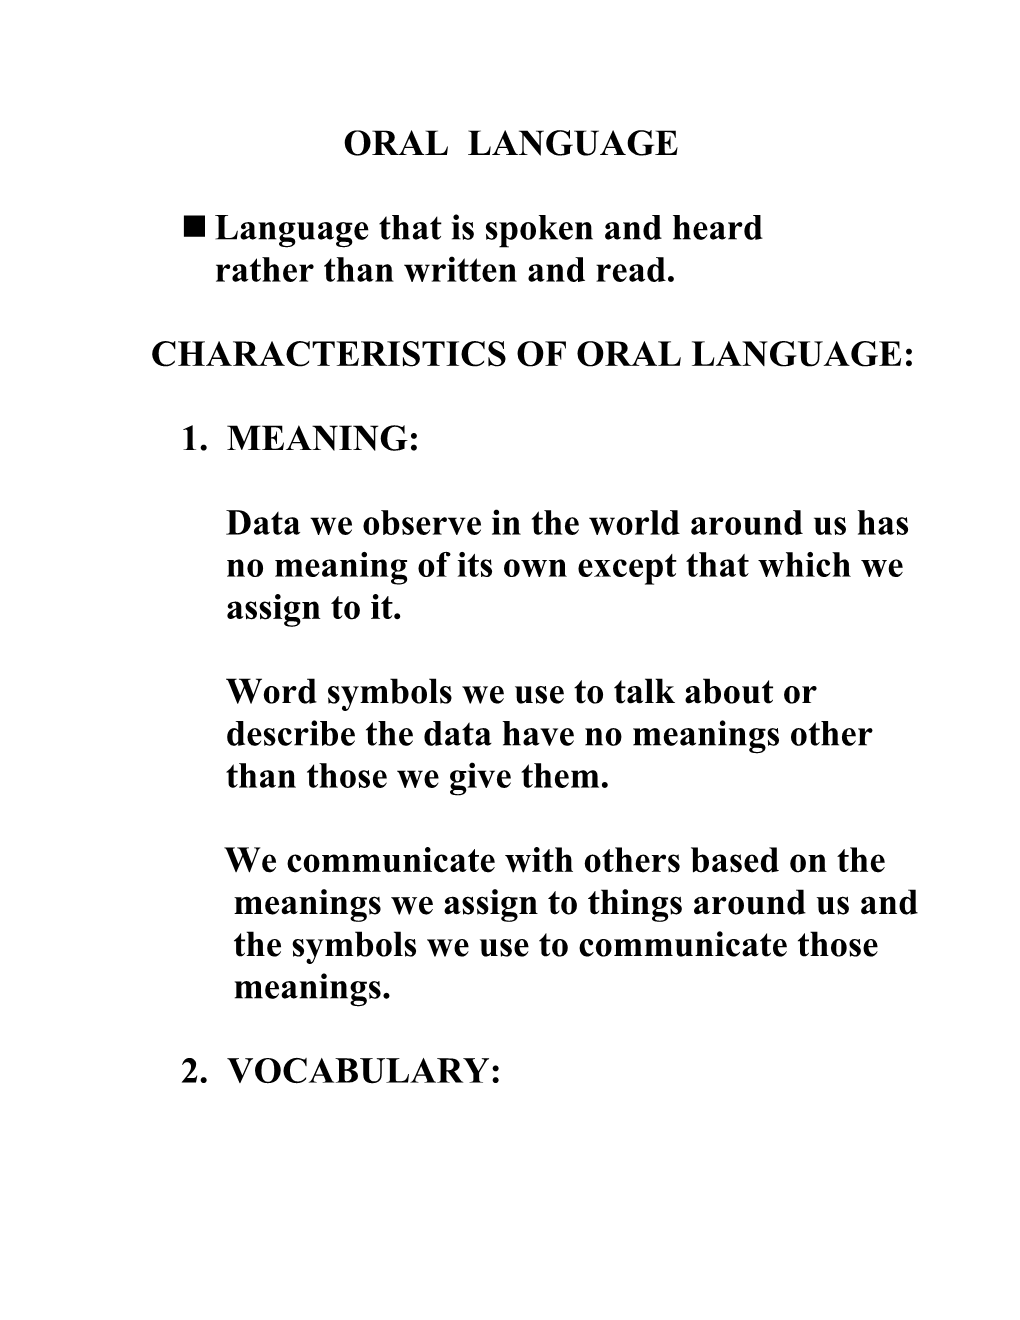 Language That Is Spoken and Heard Rather Than Written and Read